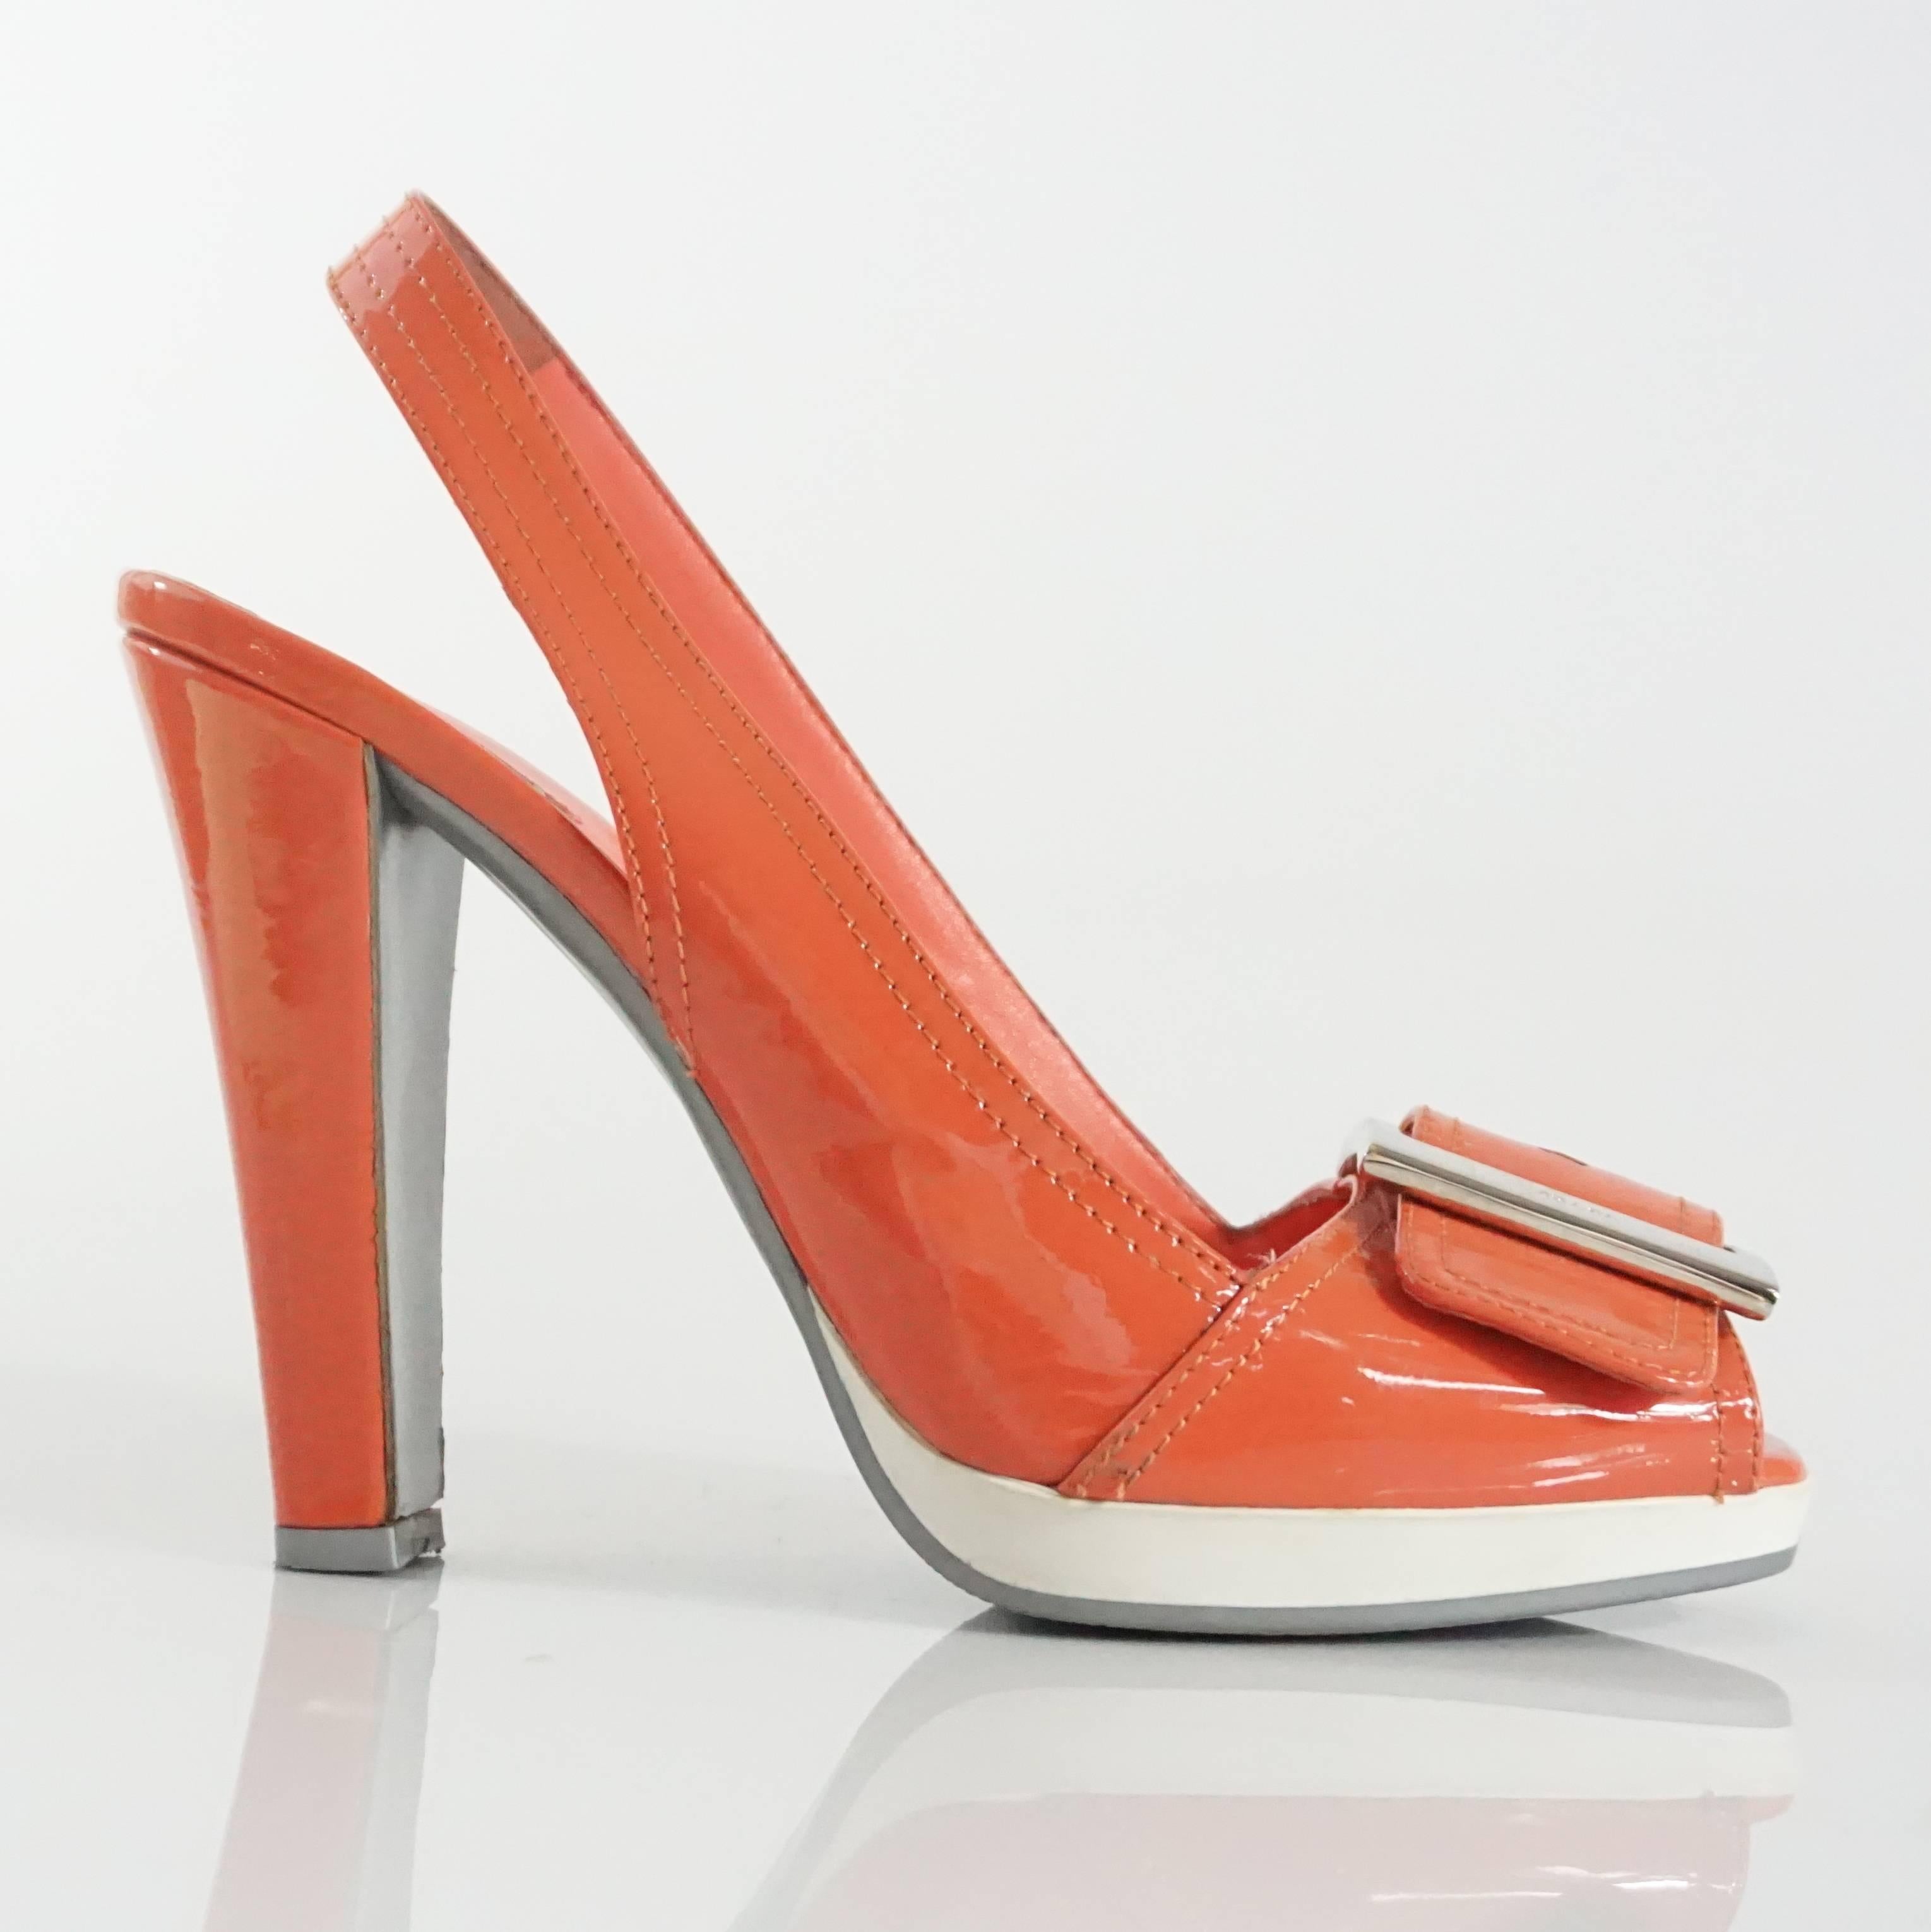 These Prada slingbacks are coral patent leather and feature a silver buckle with "Prada" engraved. There is a white platform. These heels are in very good condition with minor wear and markings on the white platform, heel, and patent